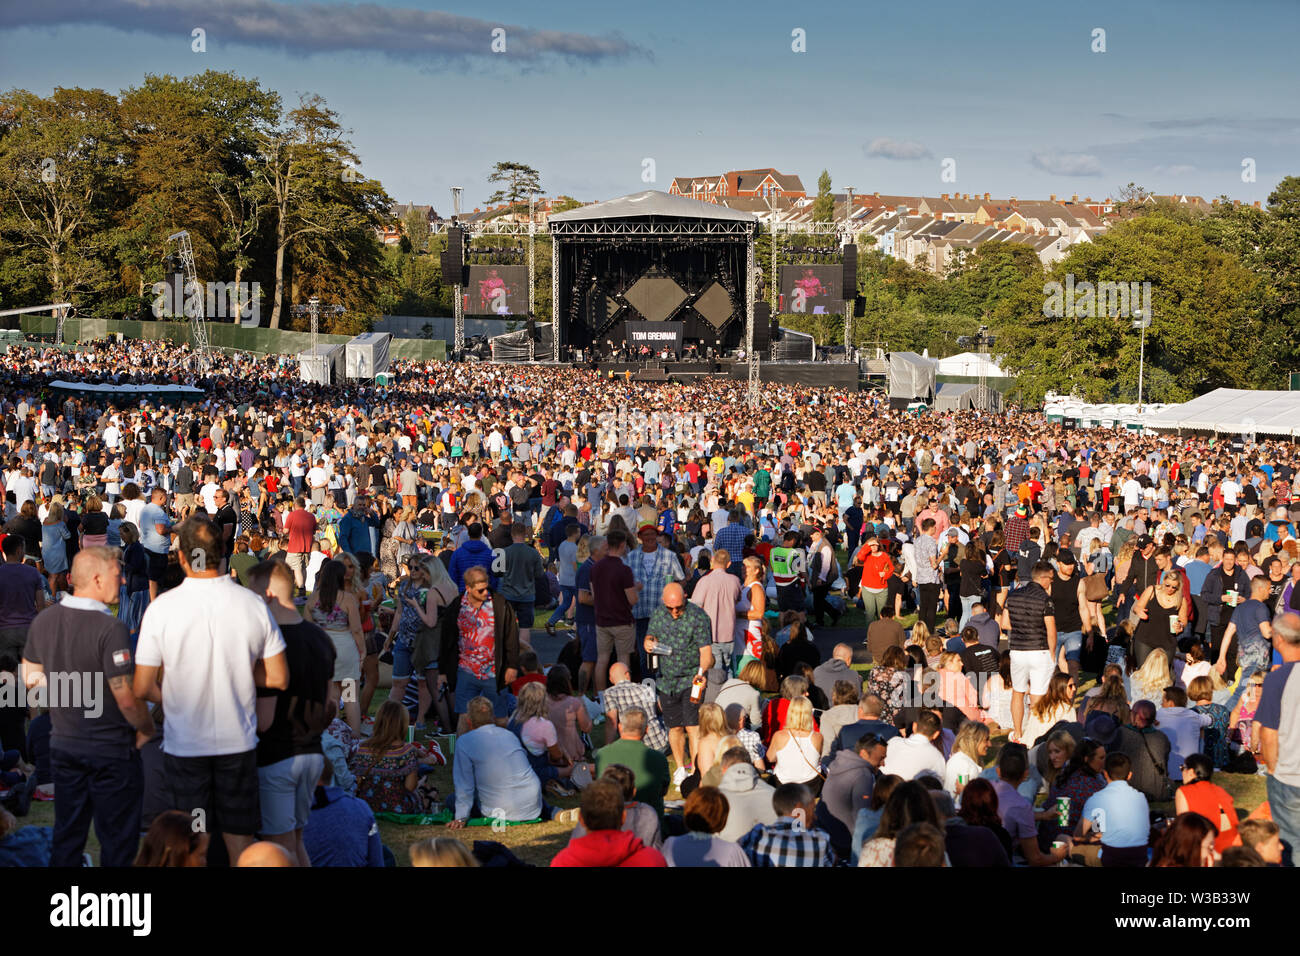 Swansea, UK. 13th July, 2019. General view of the venue. Re: Stereophonics live concert at the Singleton Park in Swansea, Wales, UK. Credit: ATHENA PICTURE AGENCY LTD/Alamy Live News Stock Photo